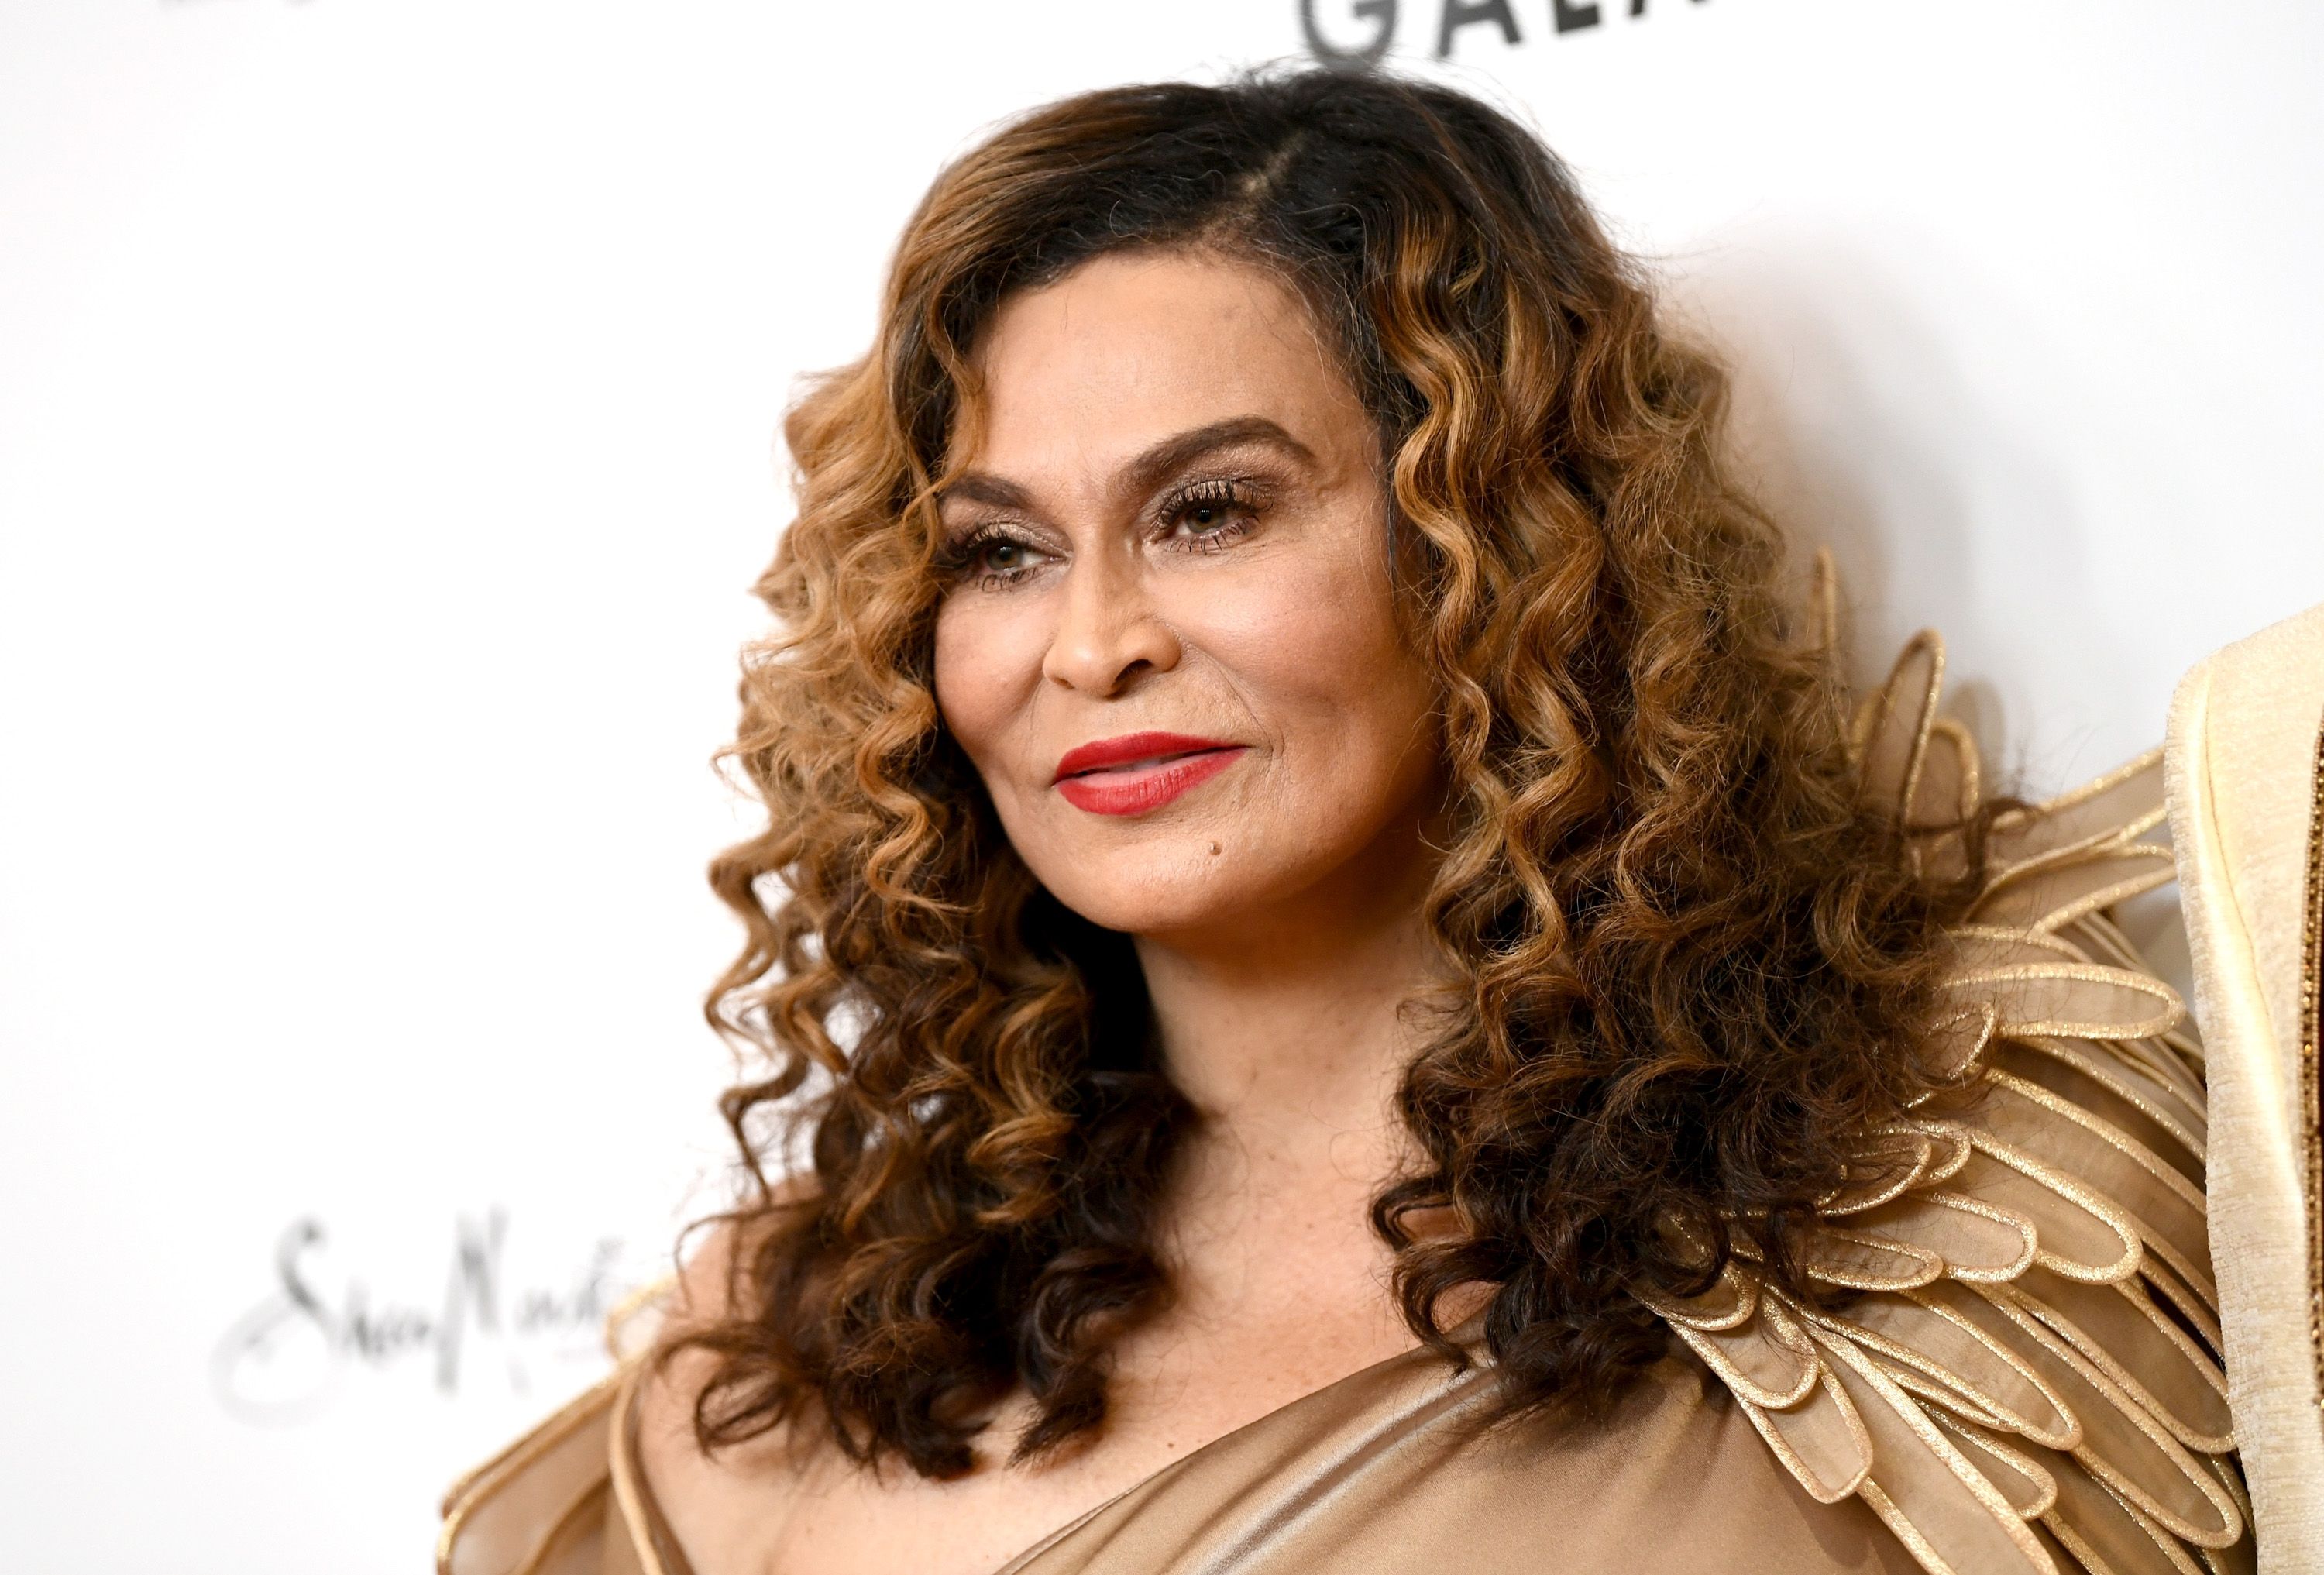 Tina Knowles at WACO Theater's 2nd Annual Wearable Art Gala on March 17, 2018. | Photo: Getty Images